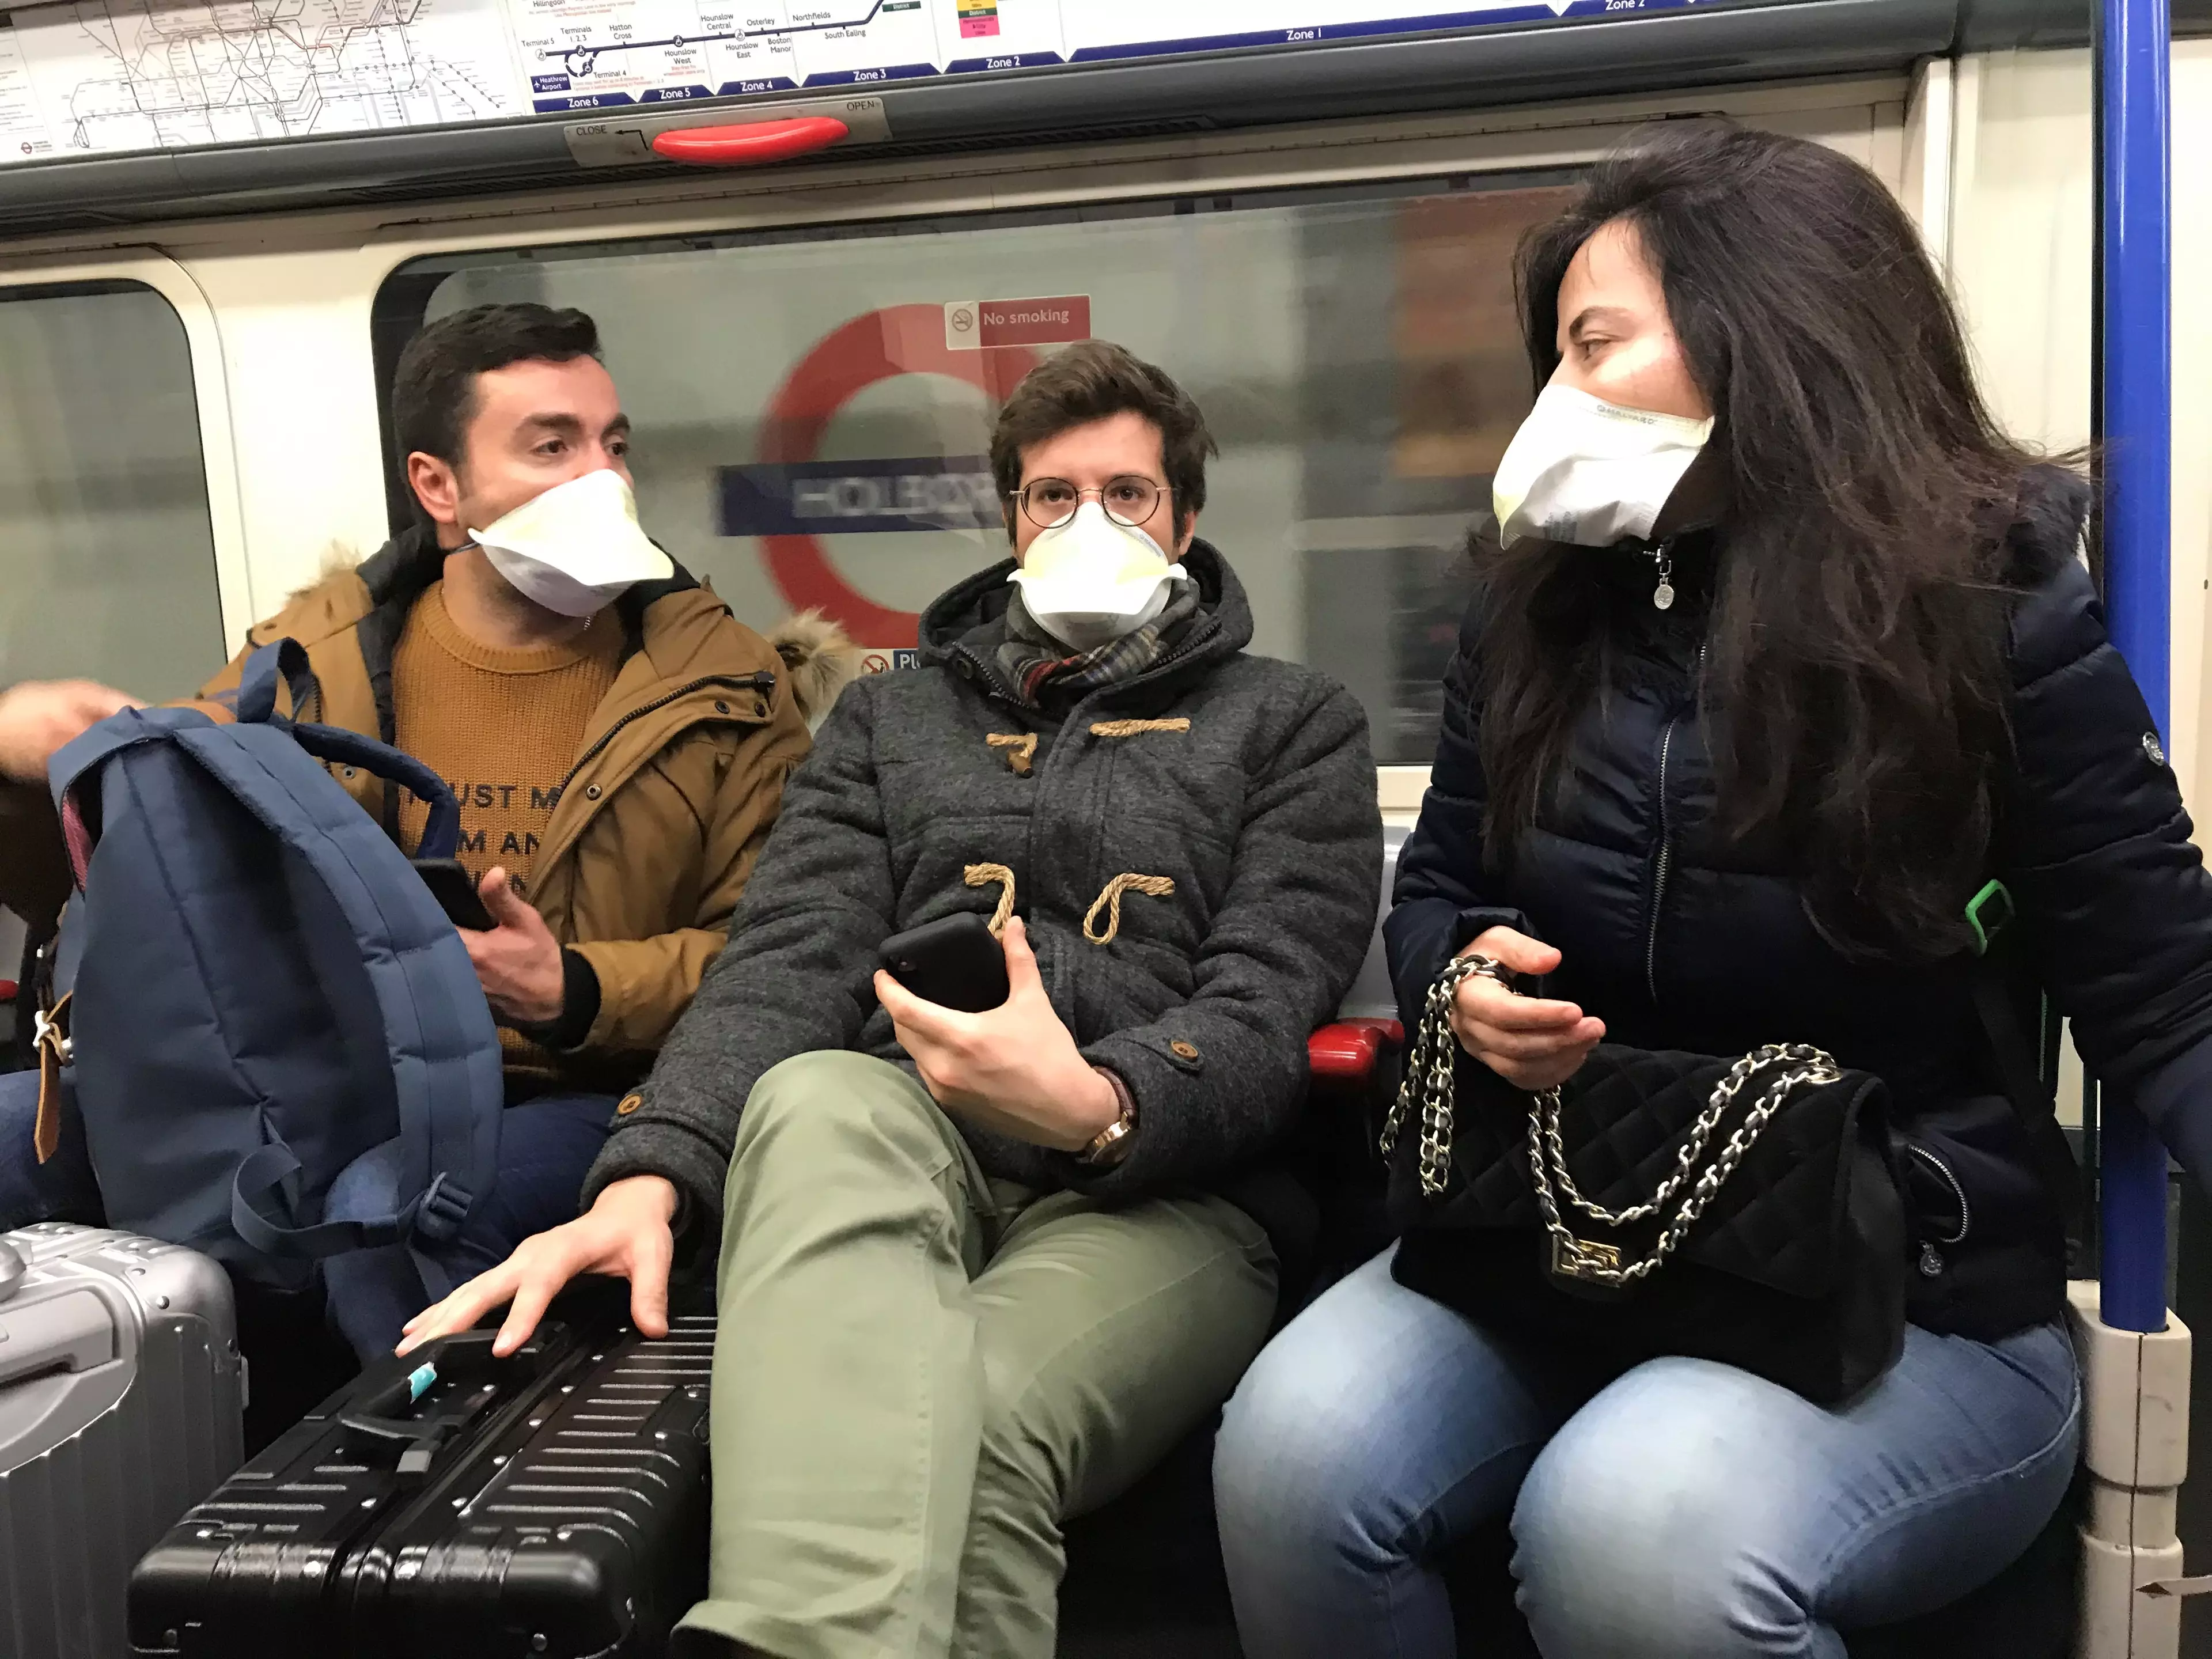 People wearing face masks on the London Underground.